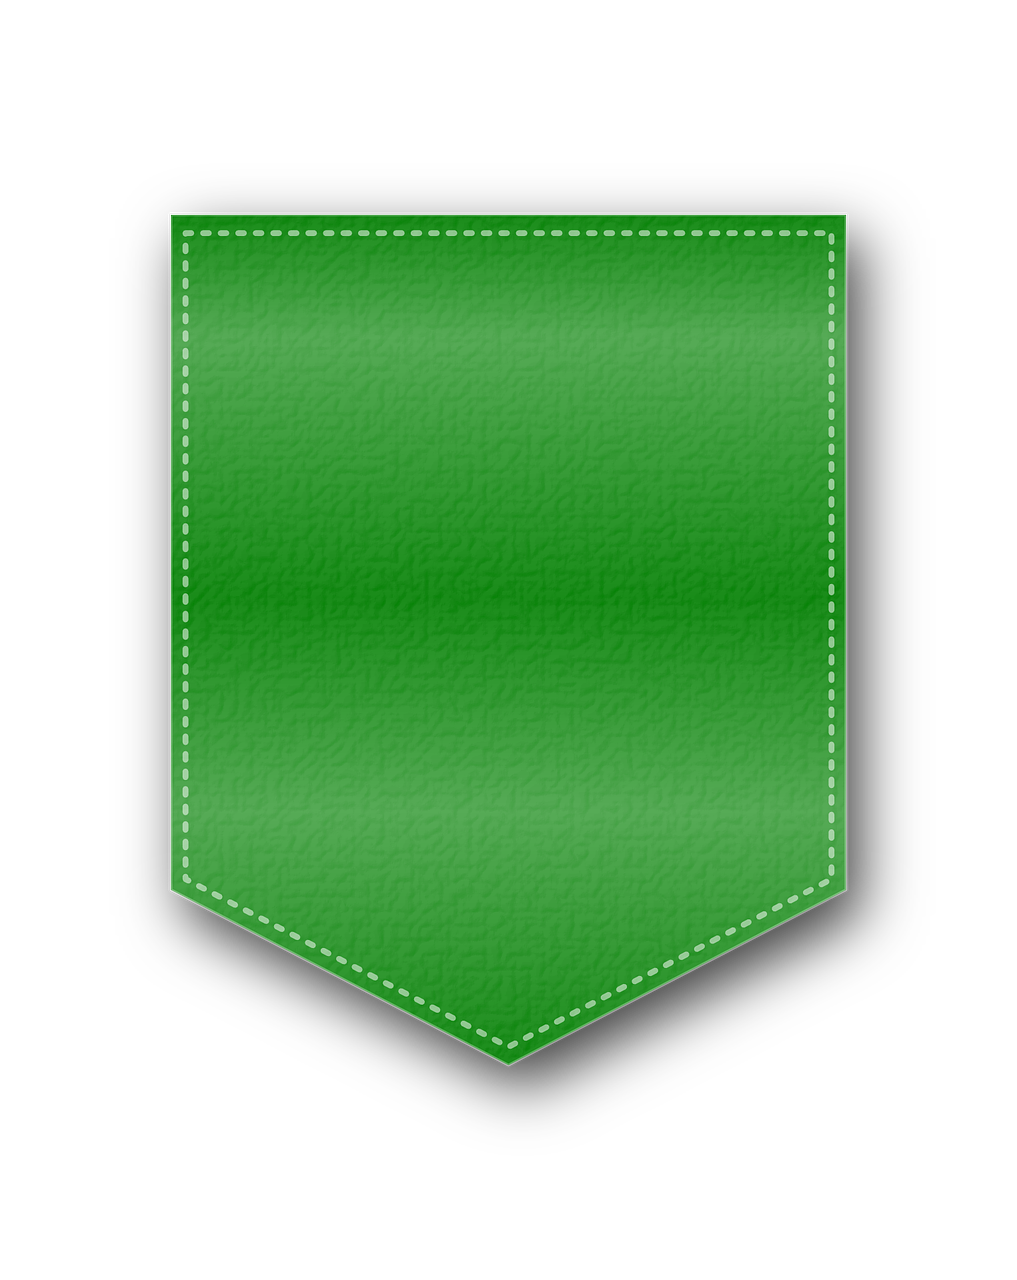 a green leather pocket on a white background, a screenshot, inspired by Masamitsu Ōta, pixabay, symbolism, vector graphics forum badge, black border, wide ribbons, fantasy shield